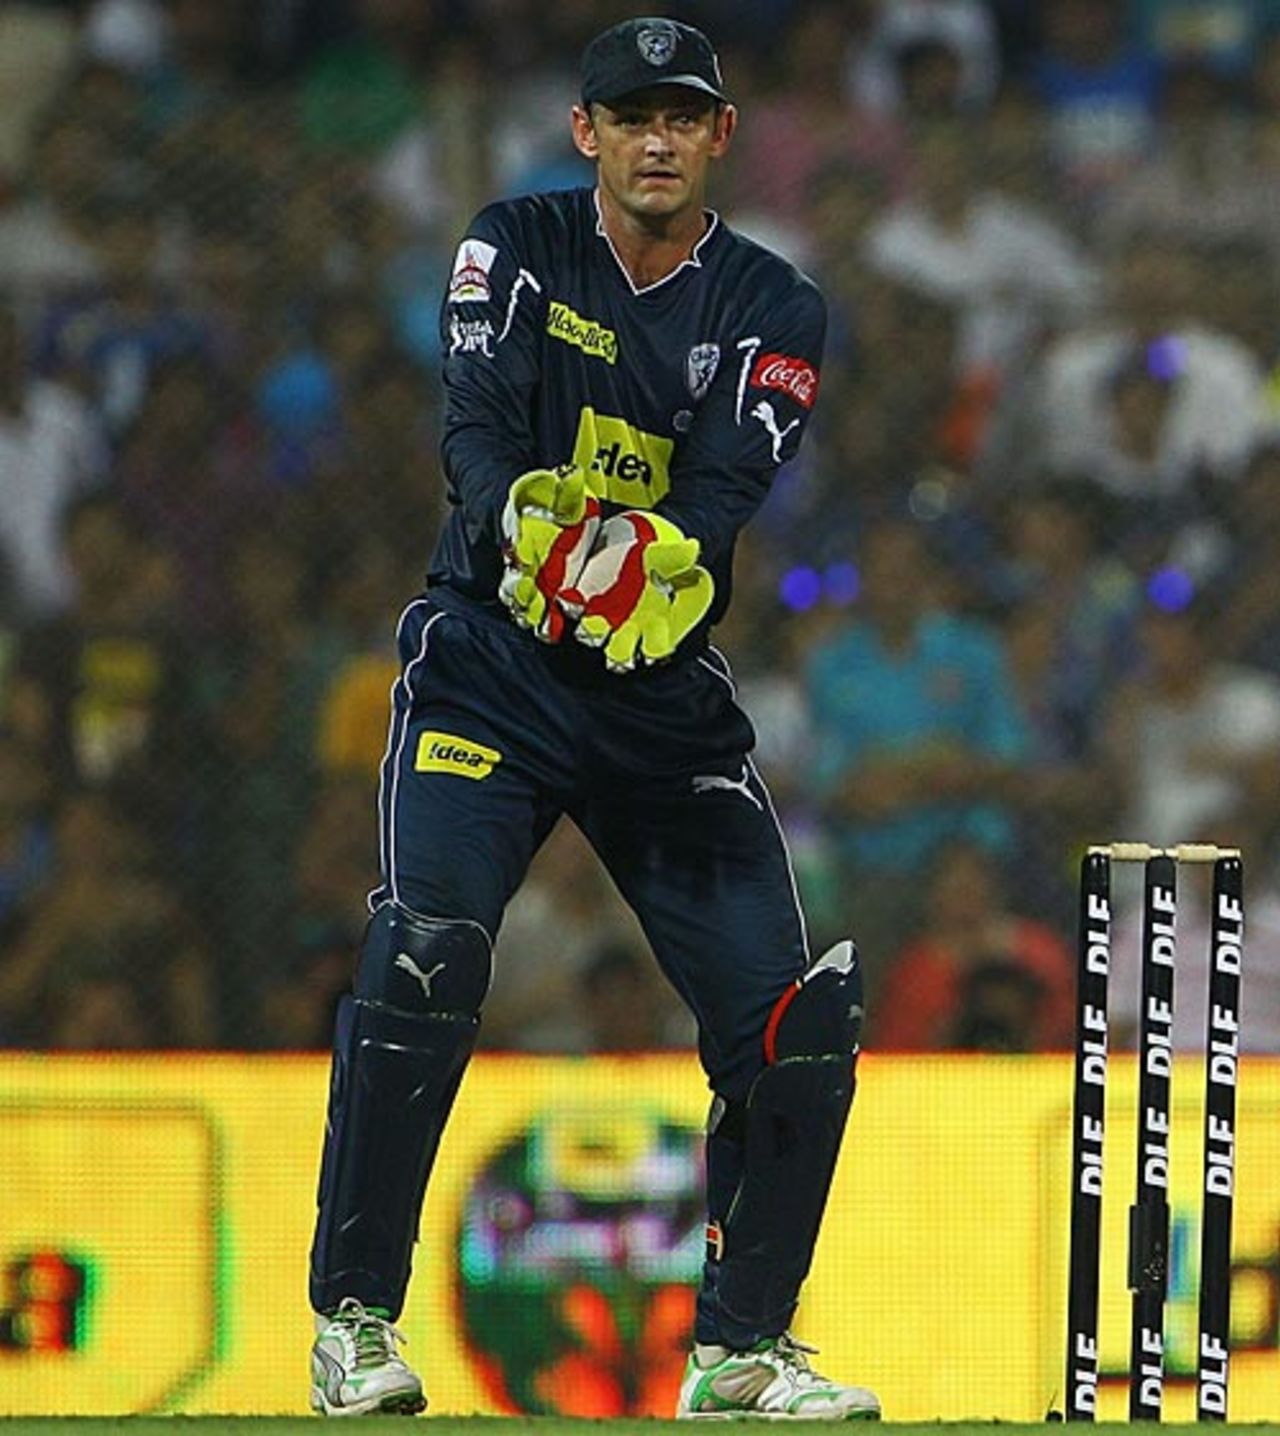 Adam Gilchrist watches a ball speed to the boundary, Deccan Chargers v Mumbai Indians, IPL, Mumbai (DY Patil), March 28, 2010